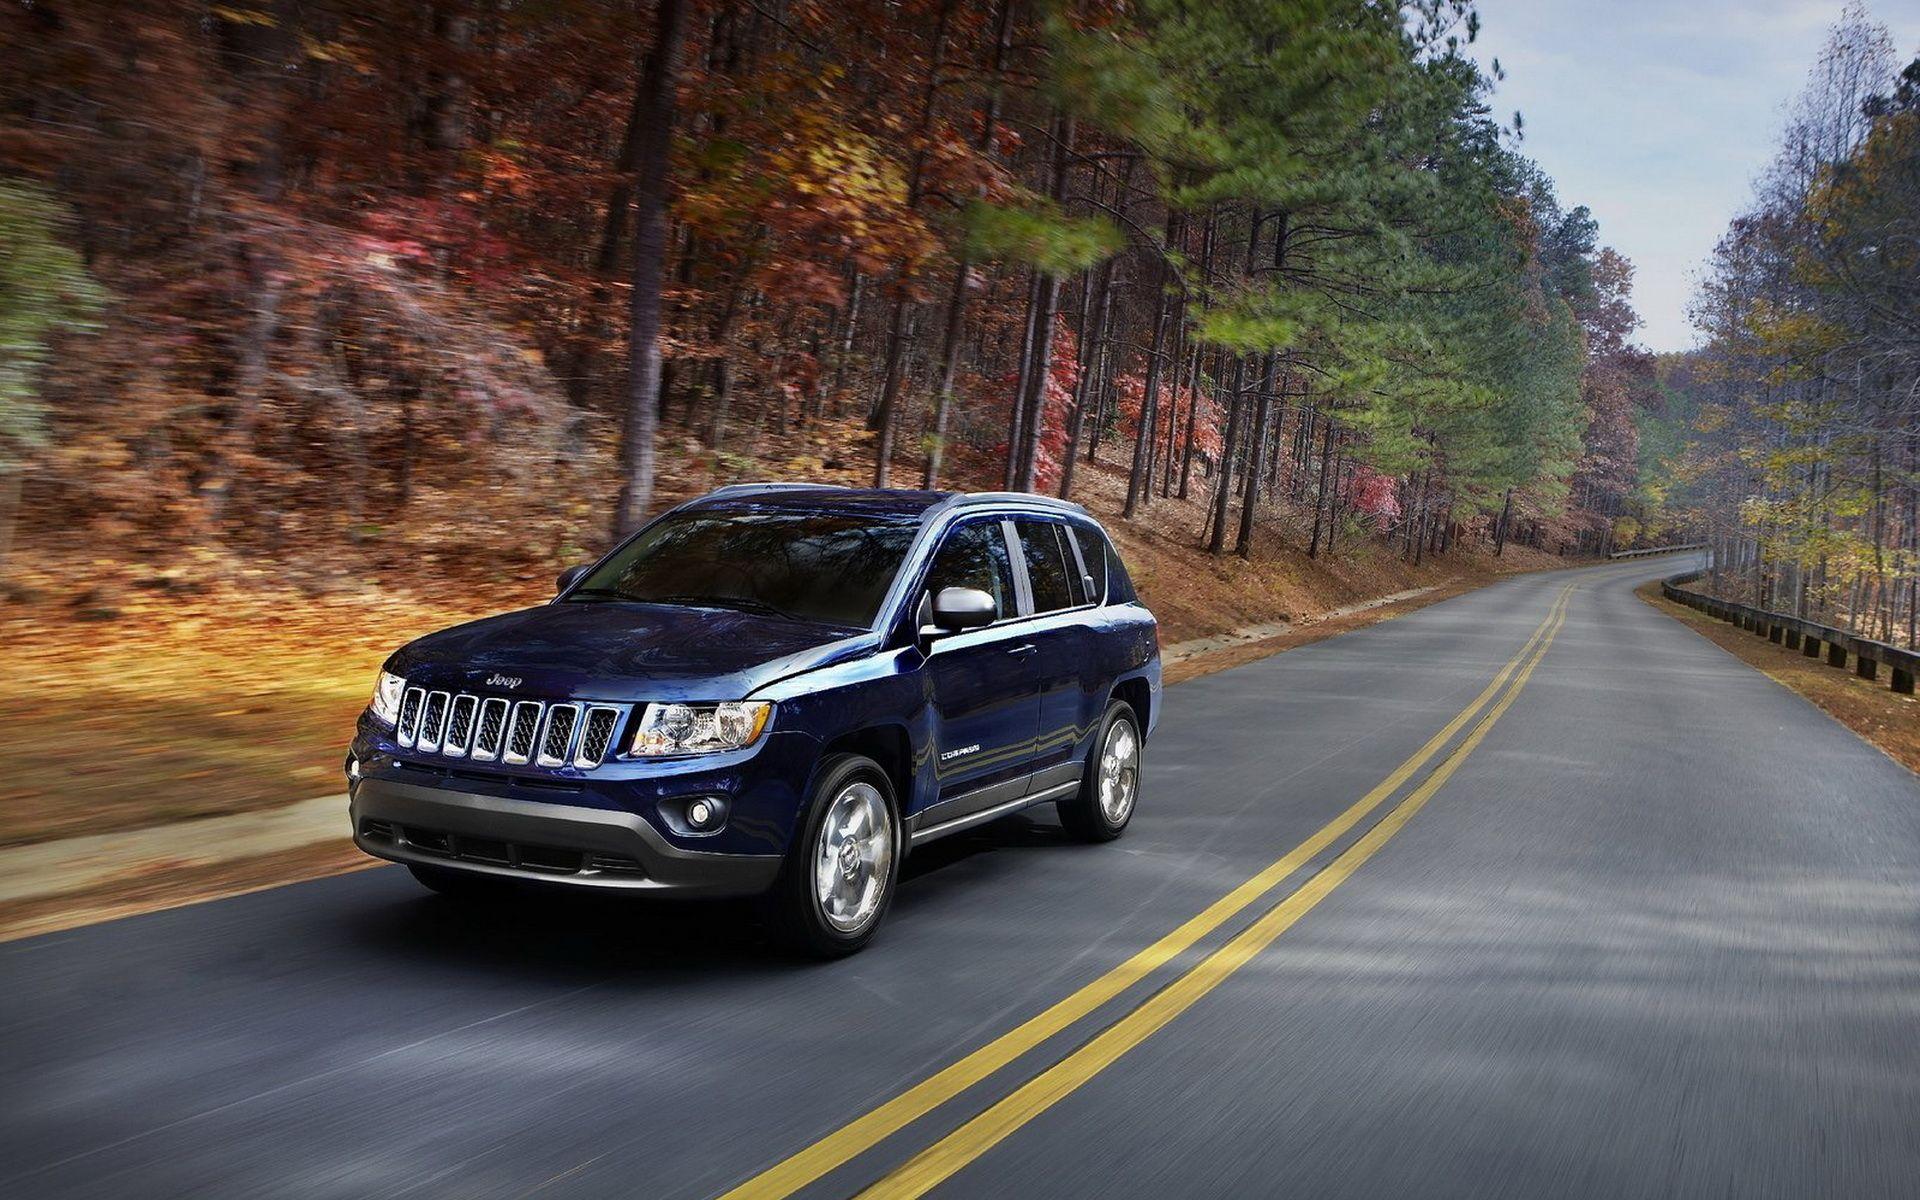 Jeep Compass S SUV 4K 5K HD Cars Wallpapers  HD Wallpapers  ID 98265